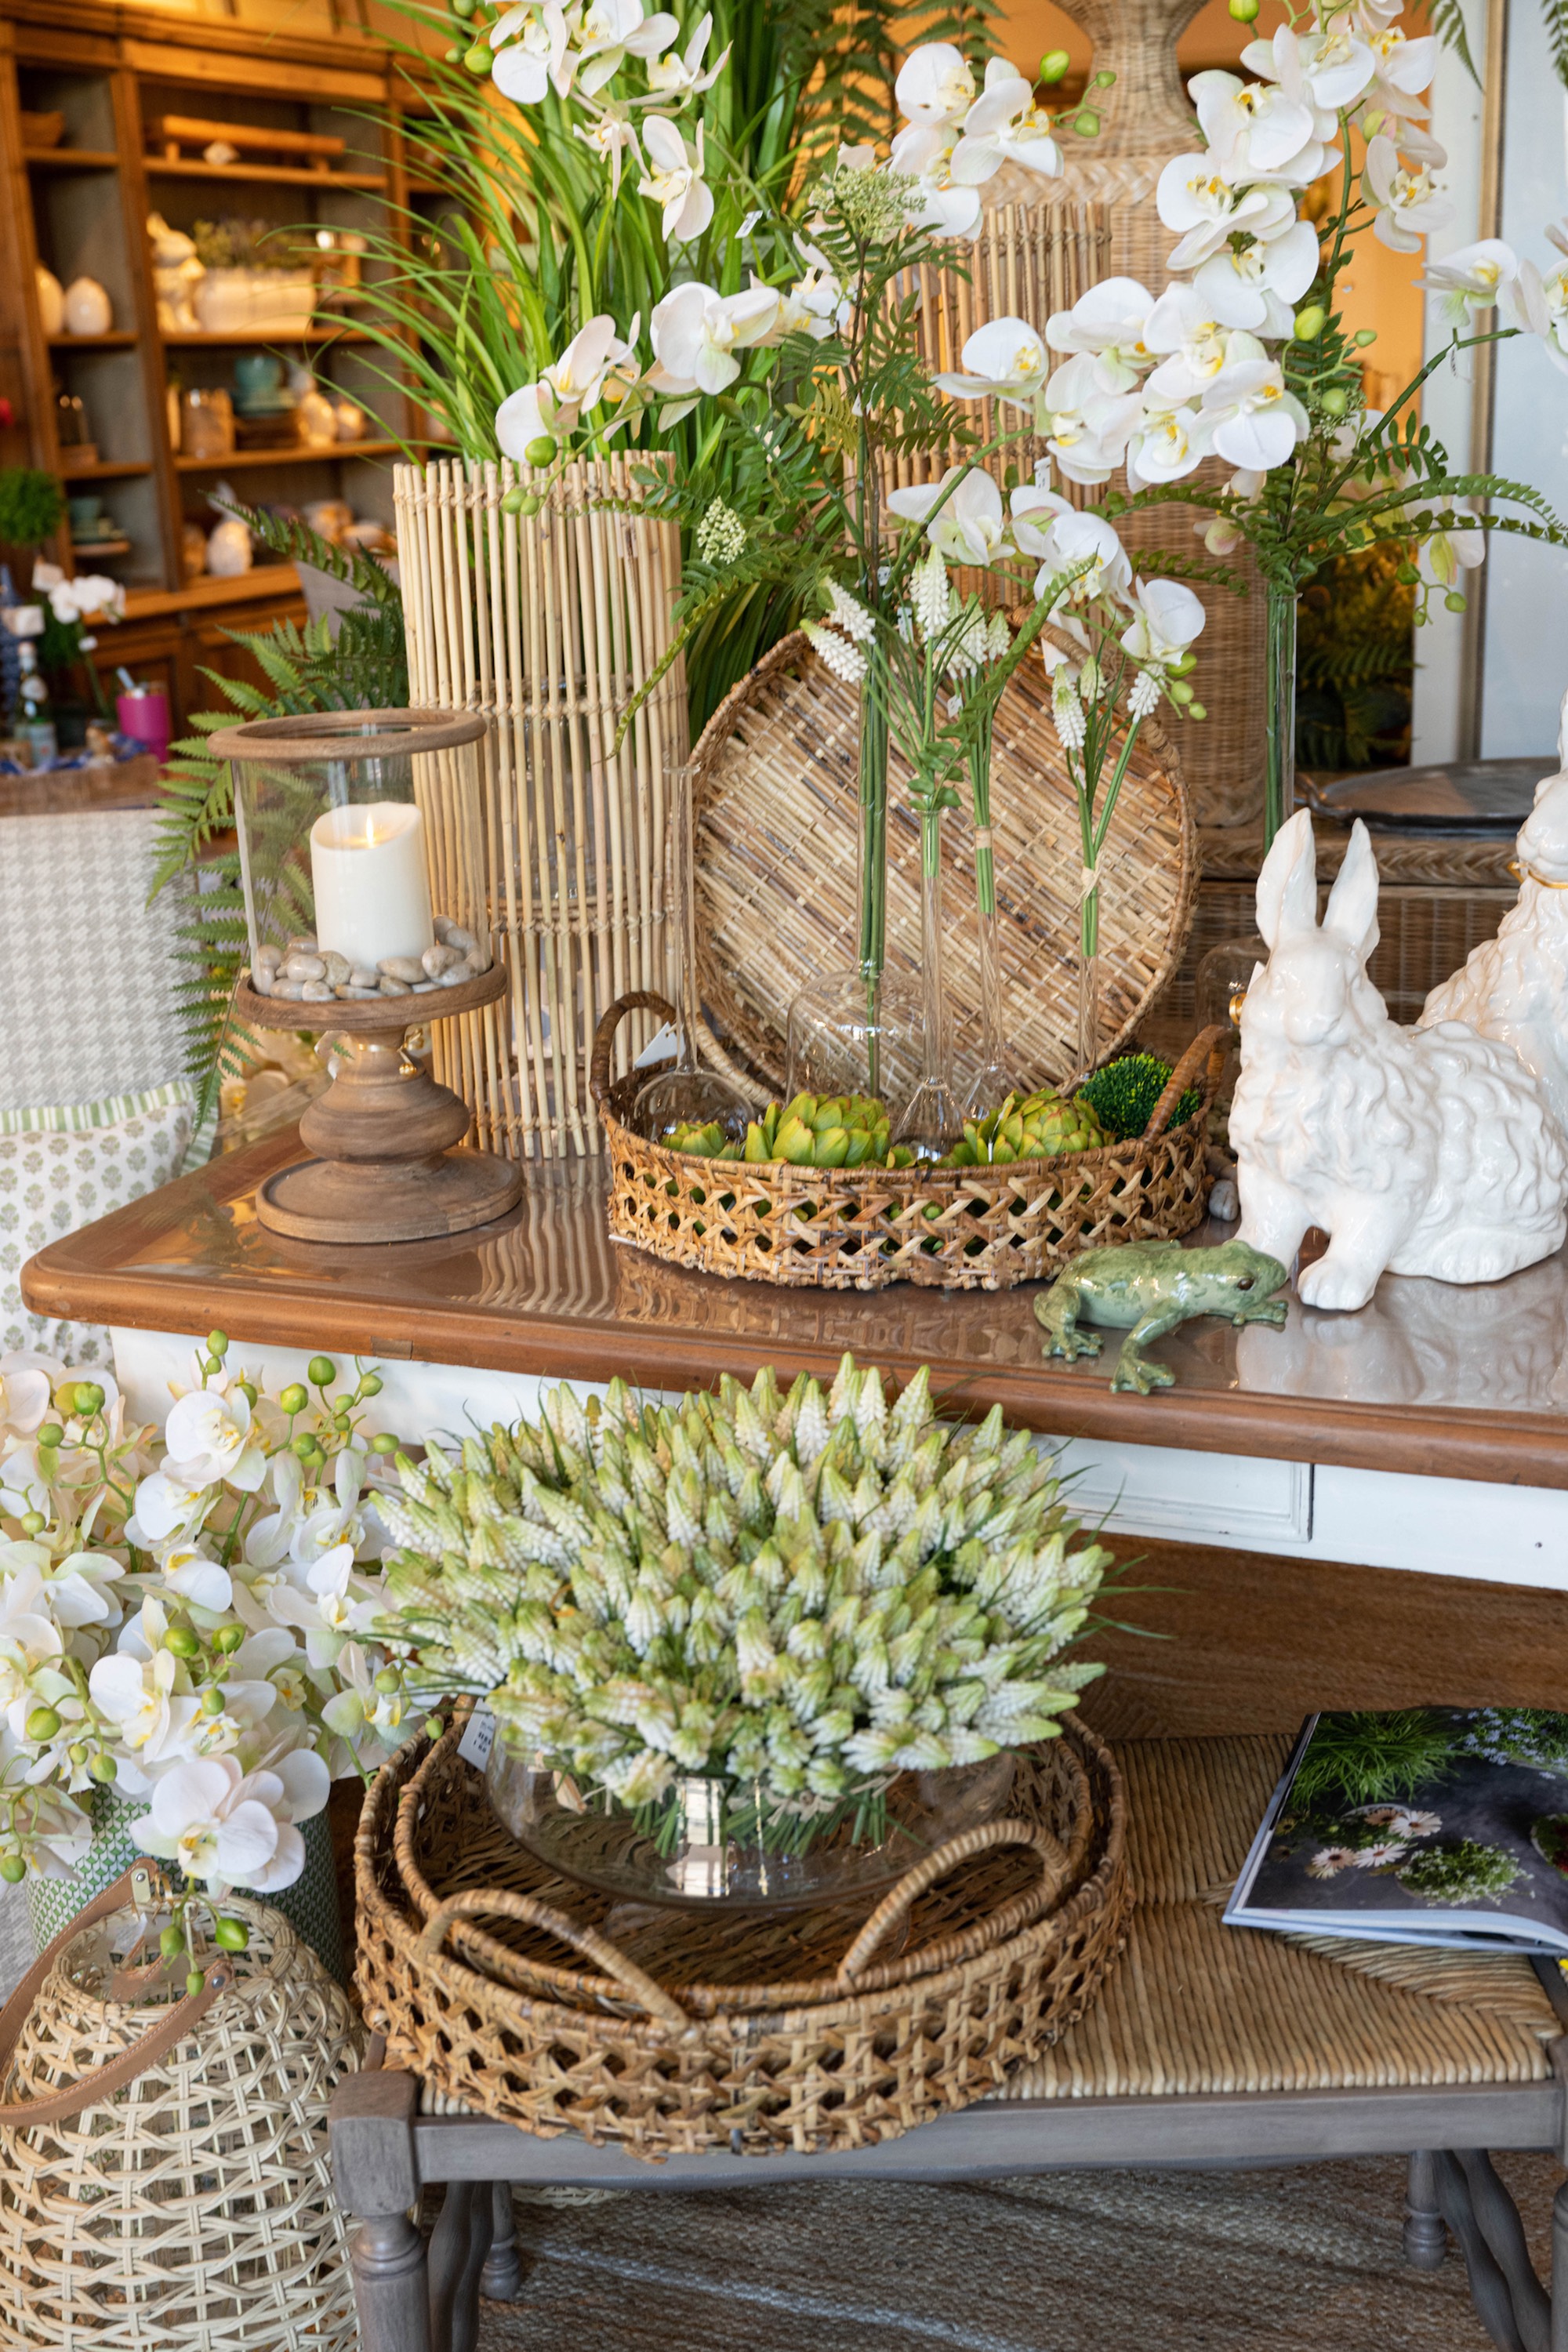 Once you find a bunny (or two) you love, itâ€™s time to display it! If you are looking to create a sweet Easter or spring vignette with your bunny as the shining star, start by placing a large bunny in the center and add smaller items around it, such as candles, vases of flowers or even decorative eggs. 